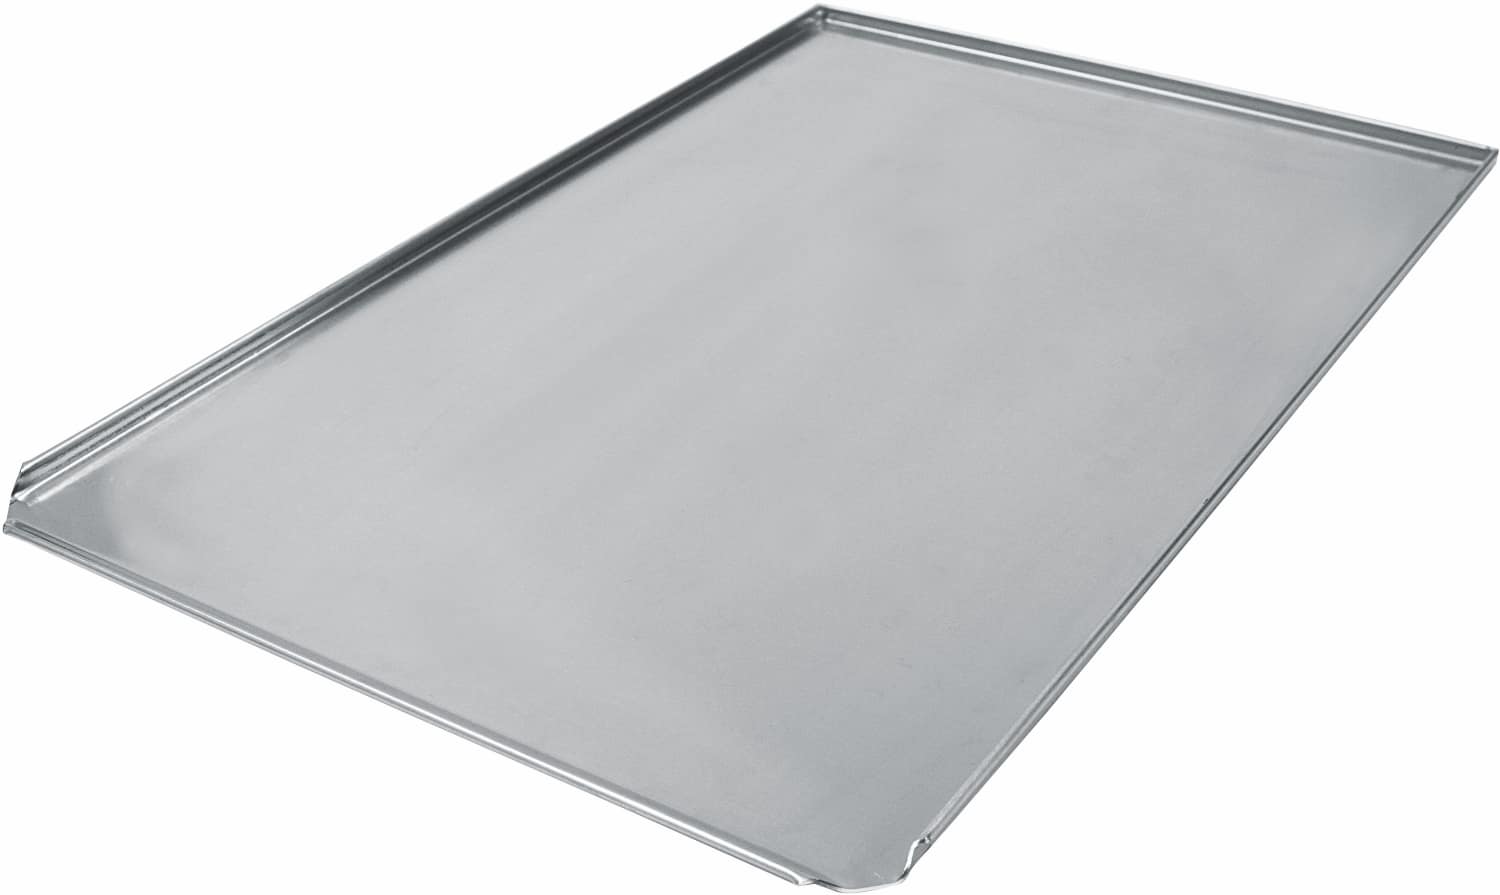 Baking tray 600 x 400 mm uncoated